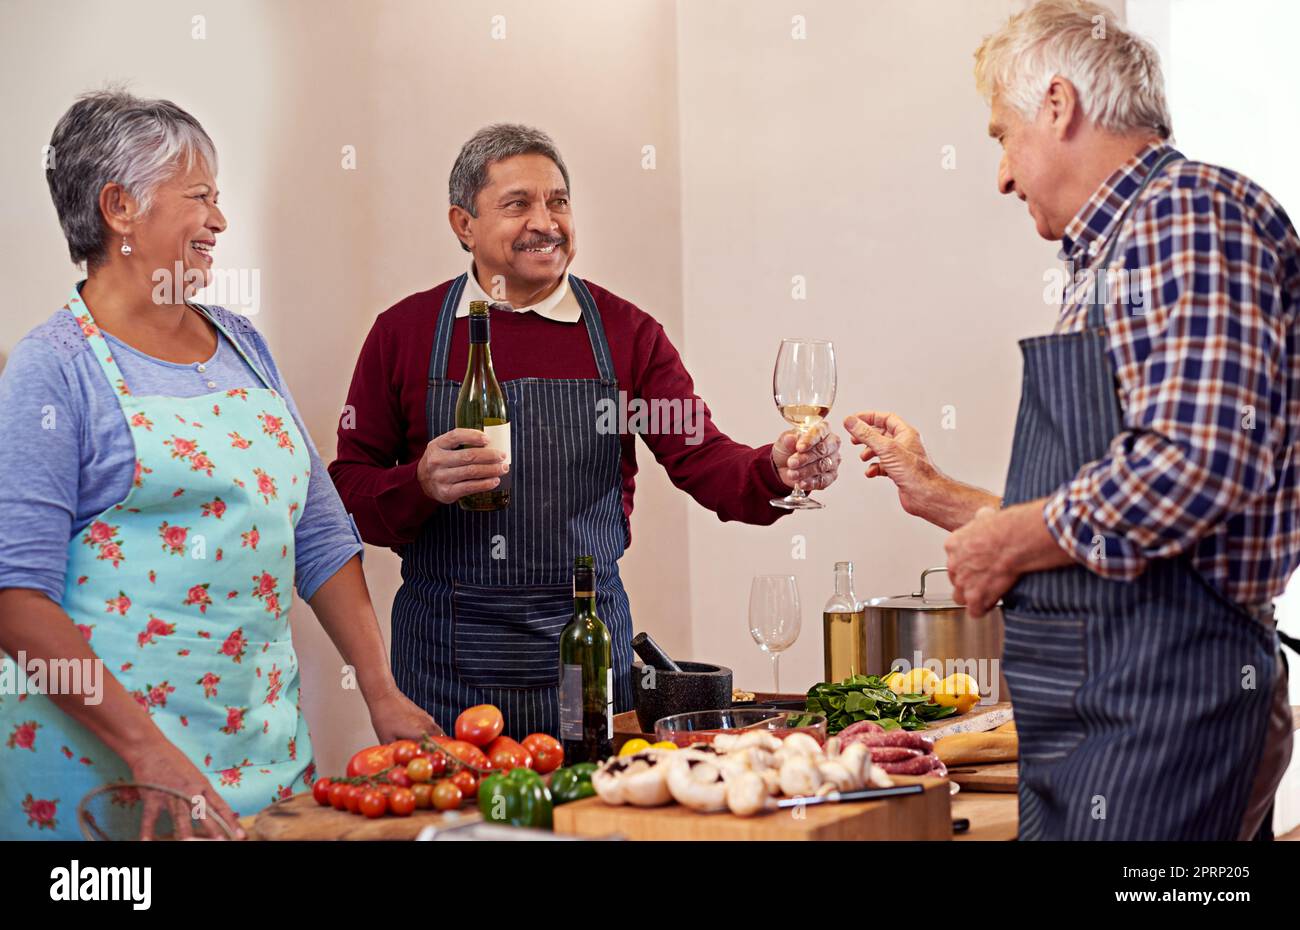 Heres to a fine meal. a group of seniors having a good time cooking together. Stock Photo